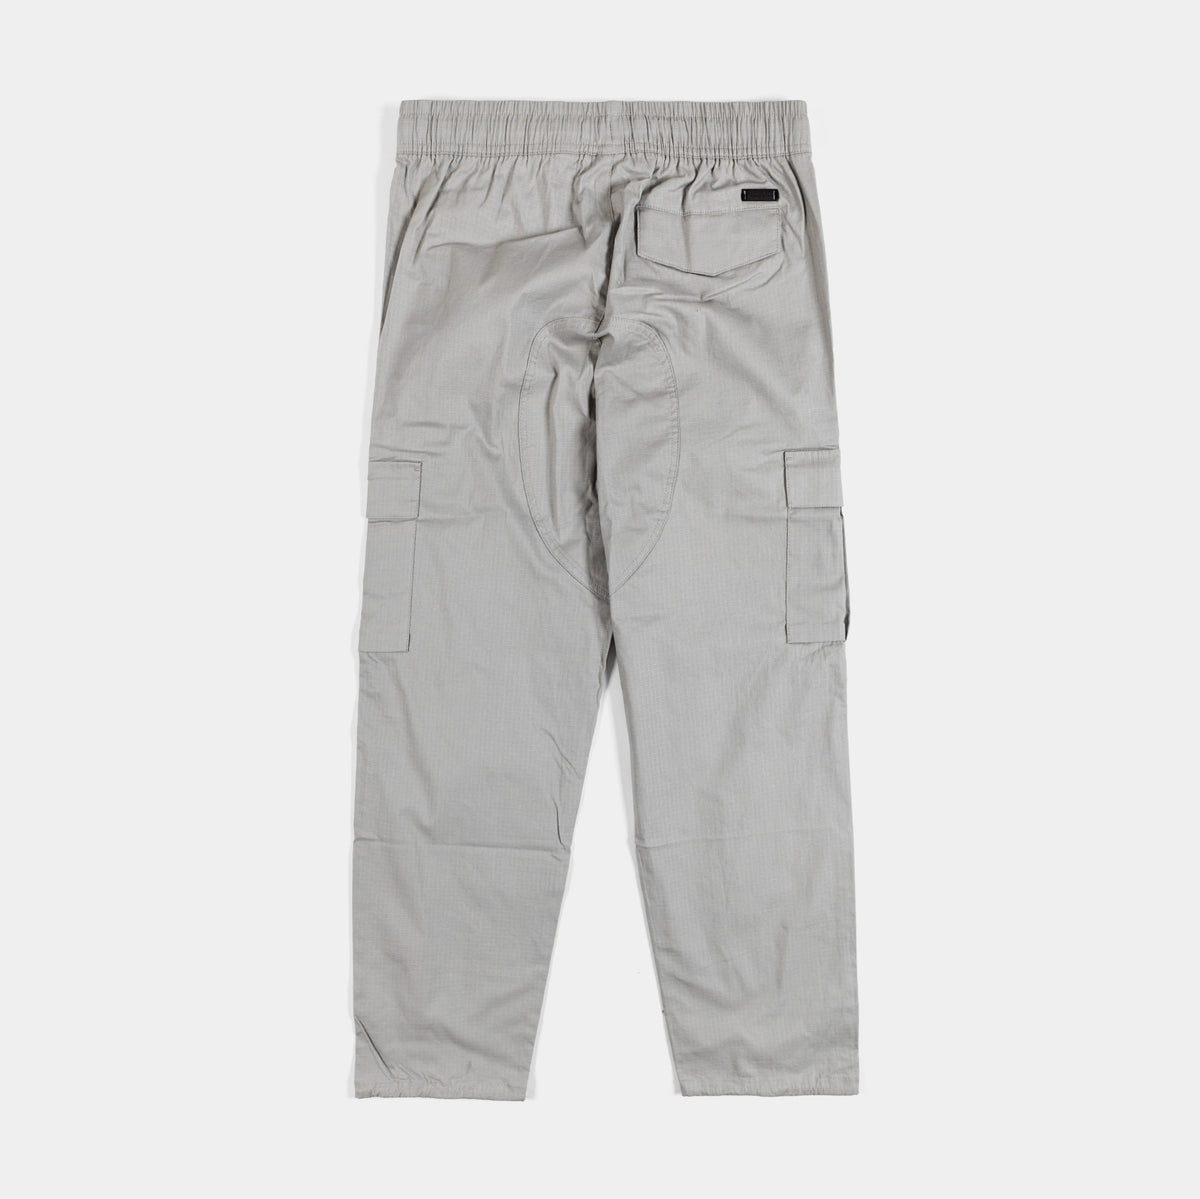 Twill Cargo Mens Pants (Olive)